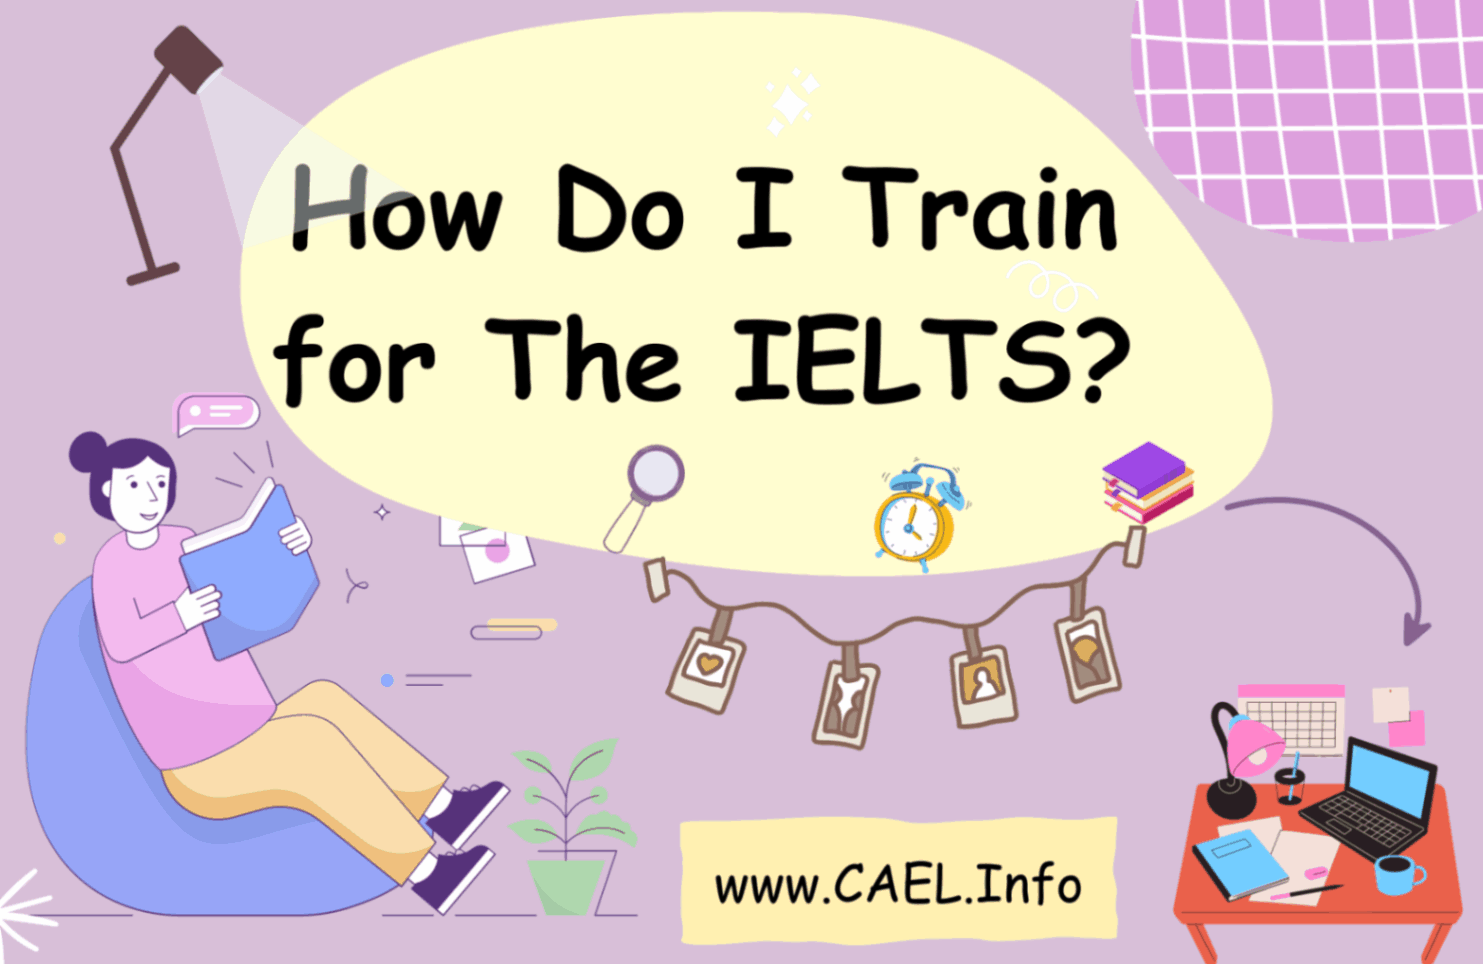 How Do I Train for The IELTS?